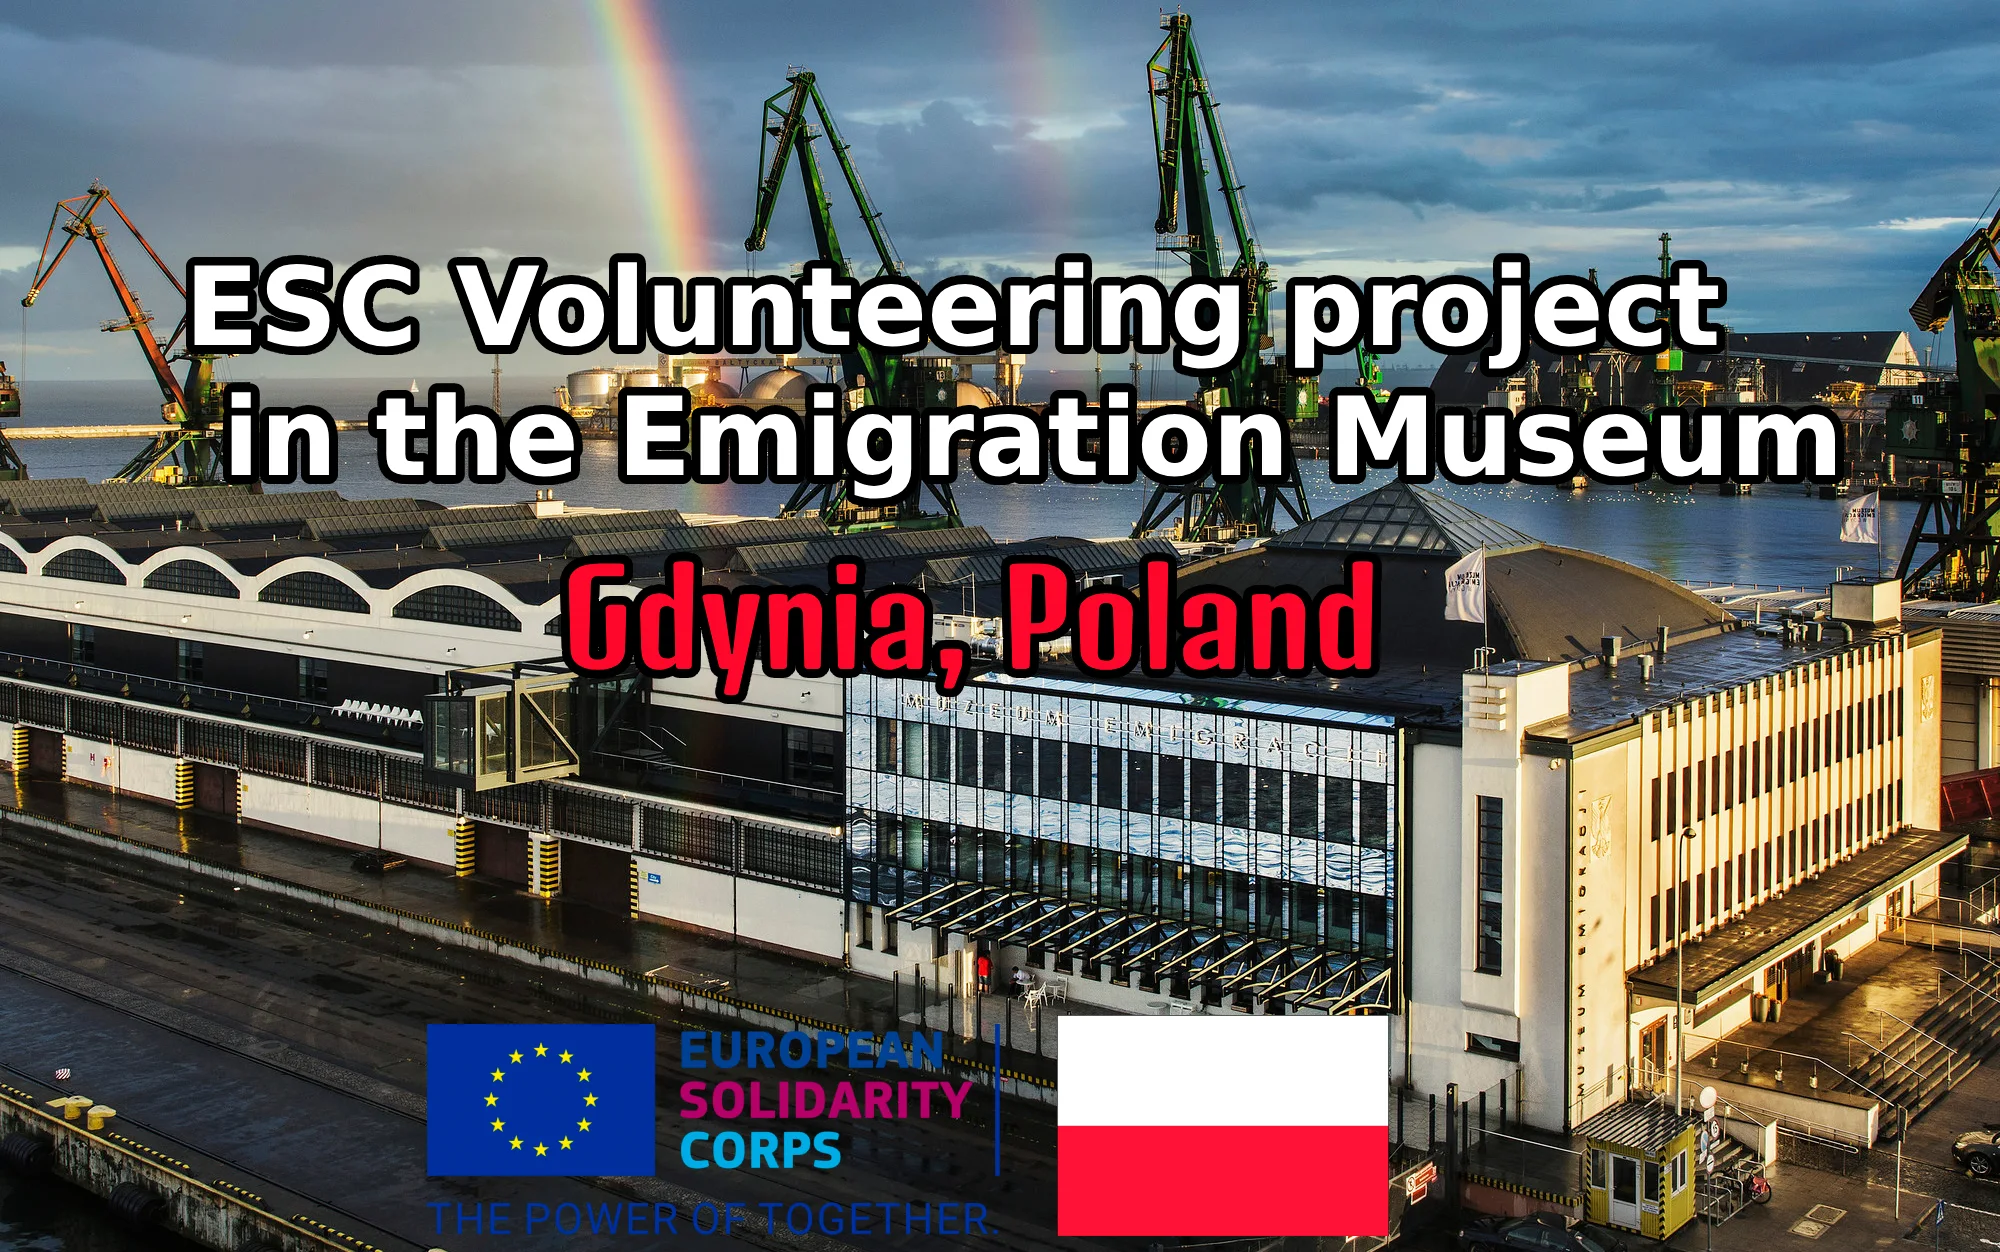 One month Volunteering Project in the Emigration Museum in Gdynia, Poland (Fully Funded)